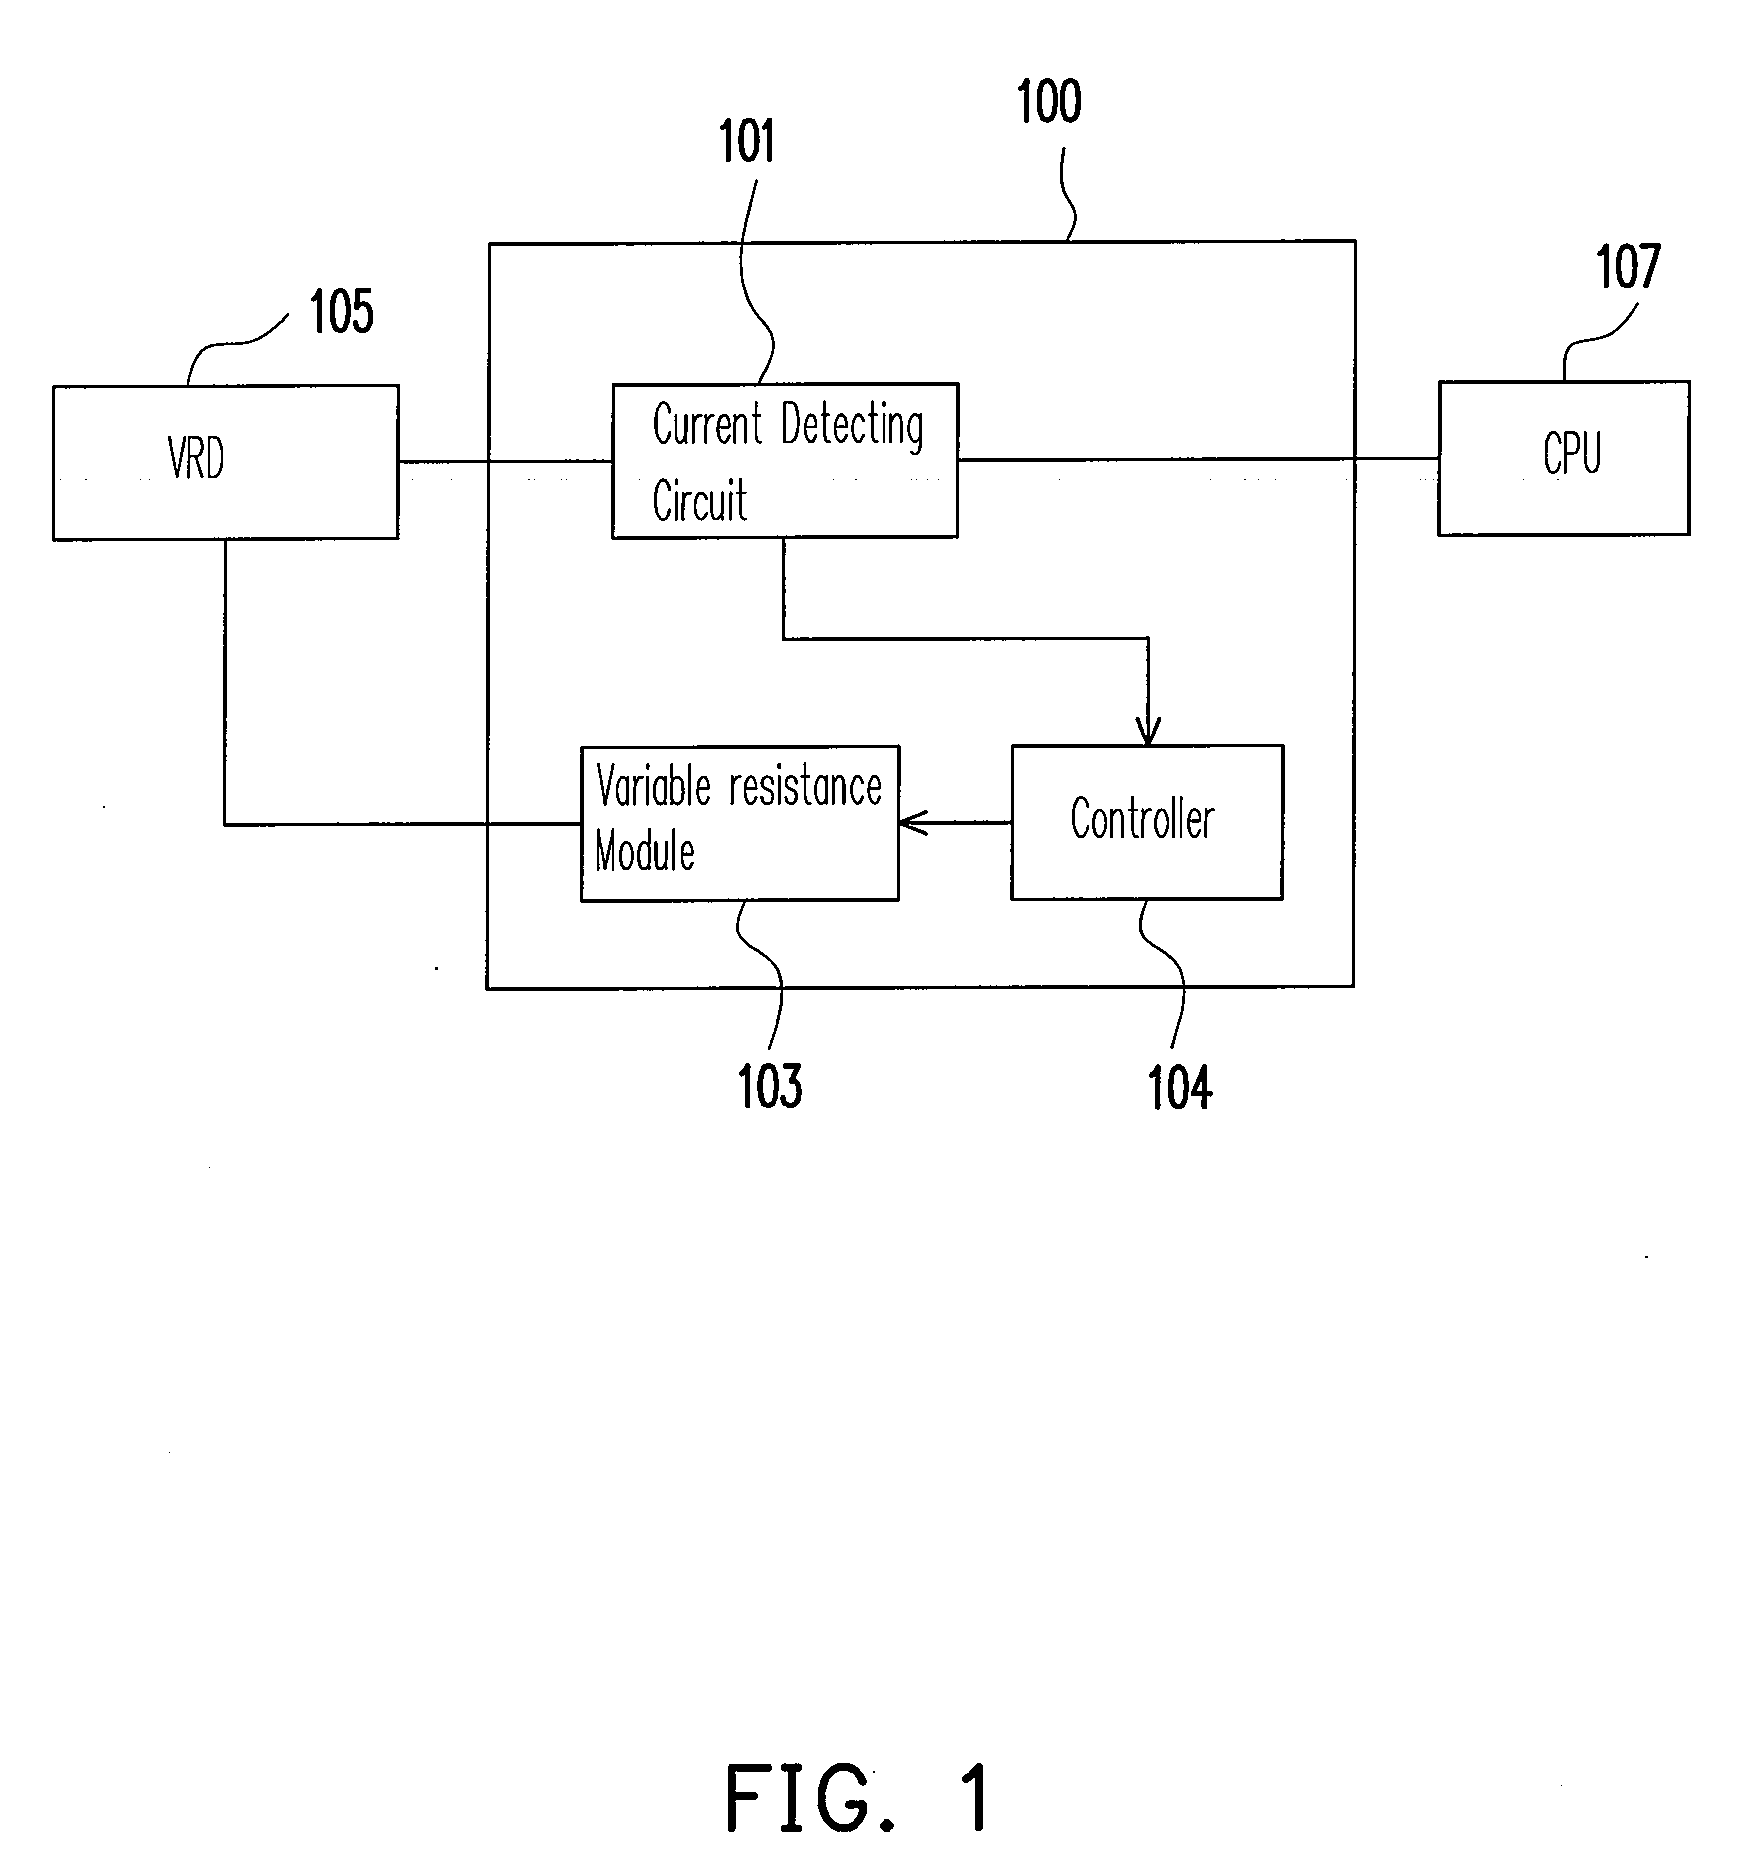 Apparatus and method for adjusting working frequency of voltage regulator down circuit (VRD) by detecting current